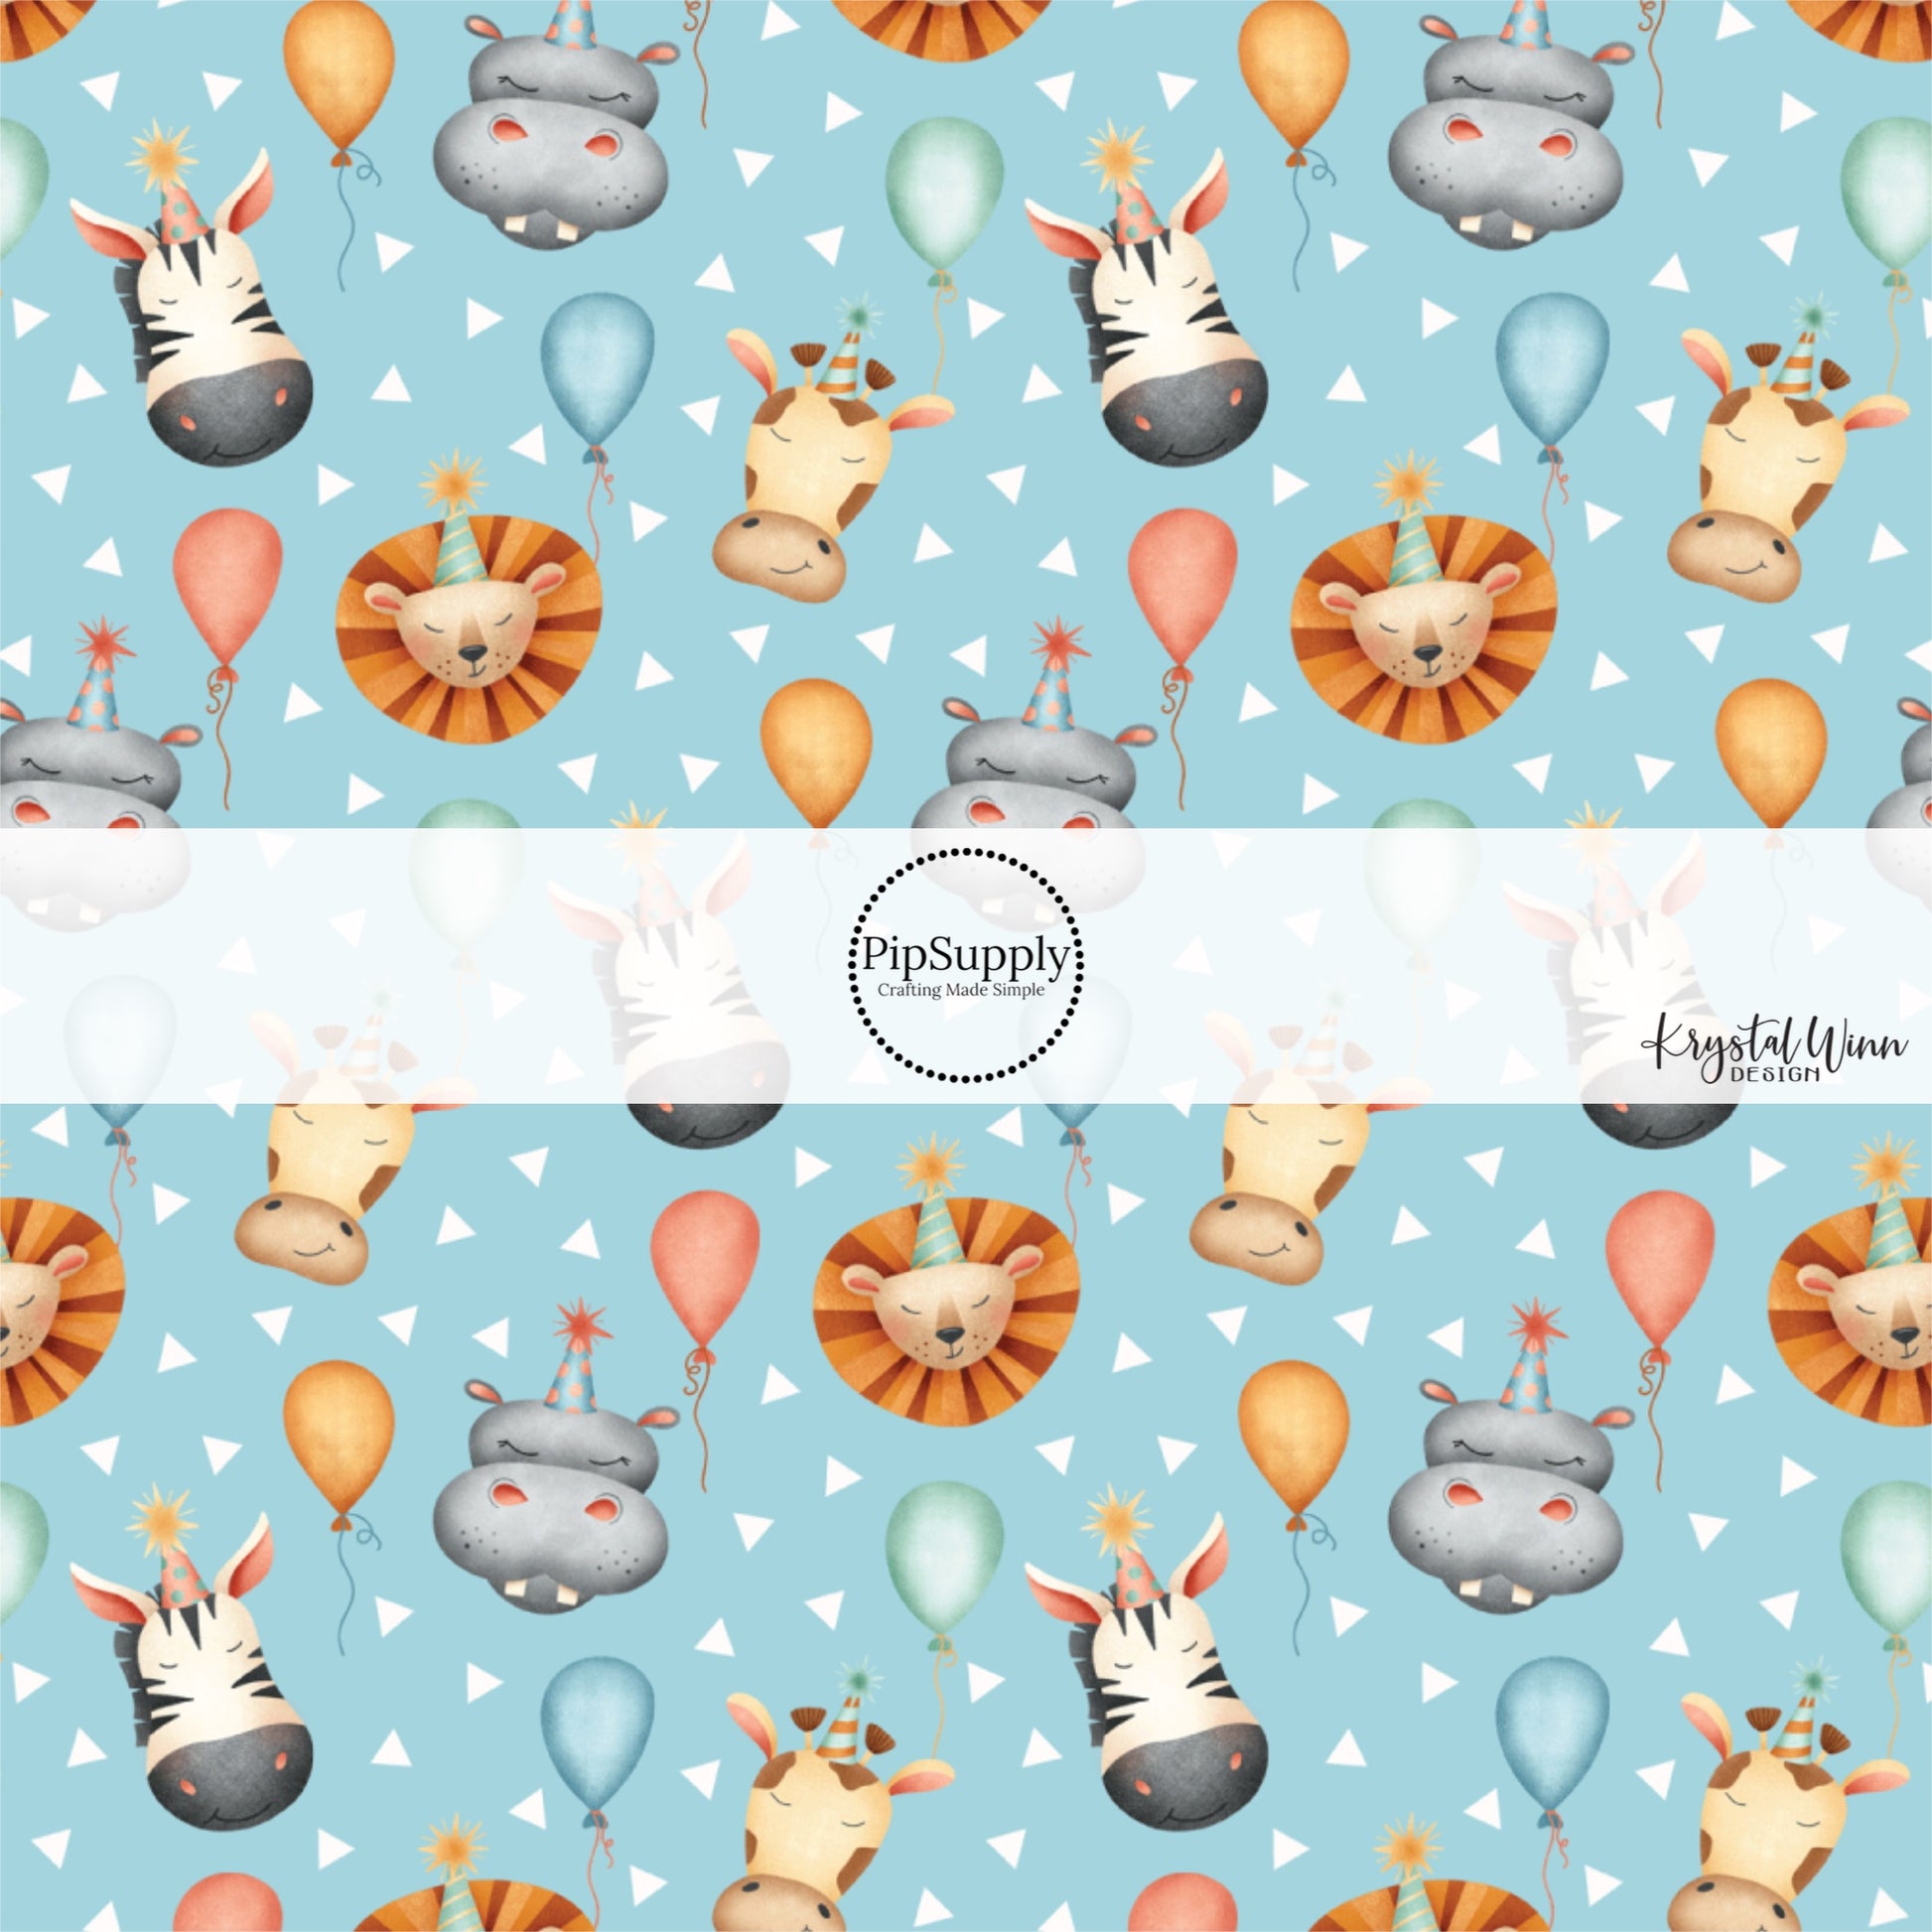 These animal themed fabric by the yard features party themed zoo animals with balloons on blue. This fun party themed fabric can be used for all your sewing and crafting needs!